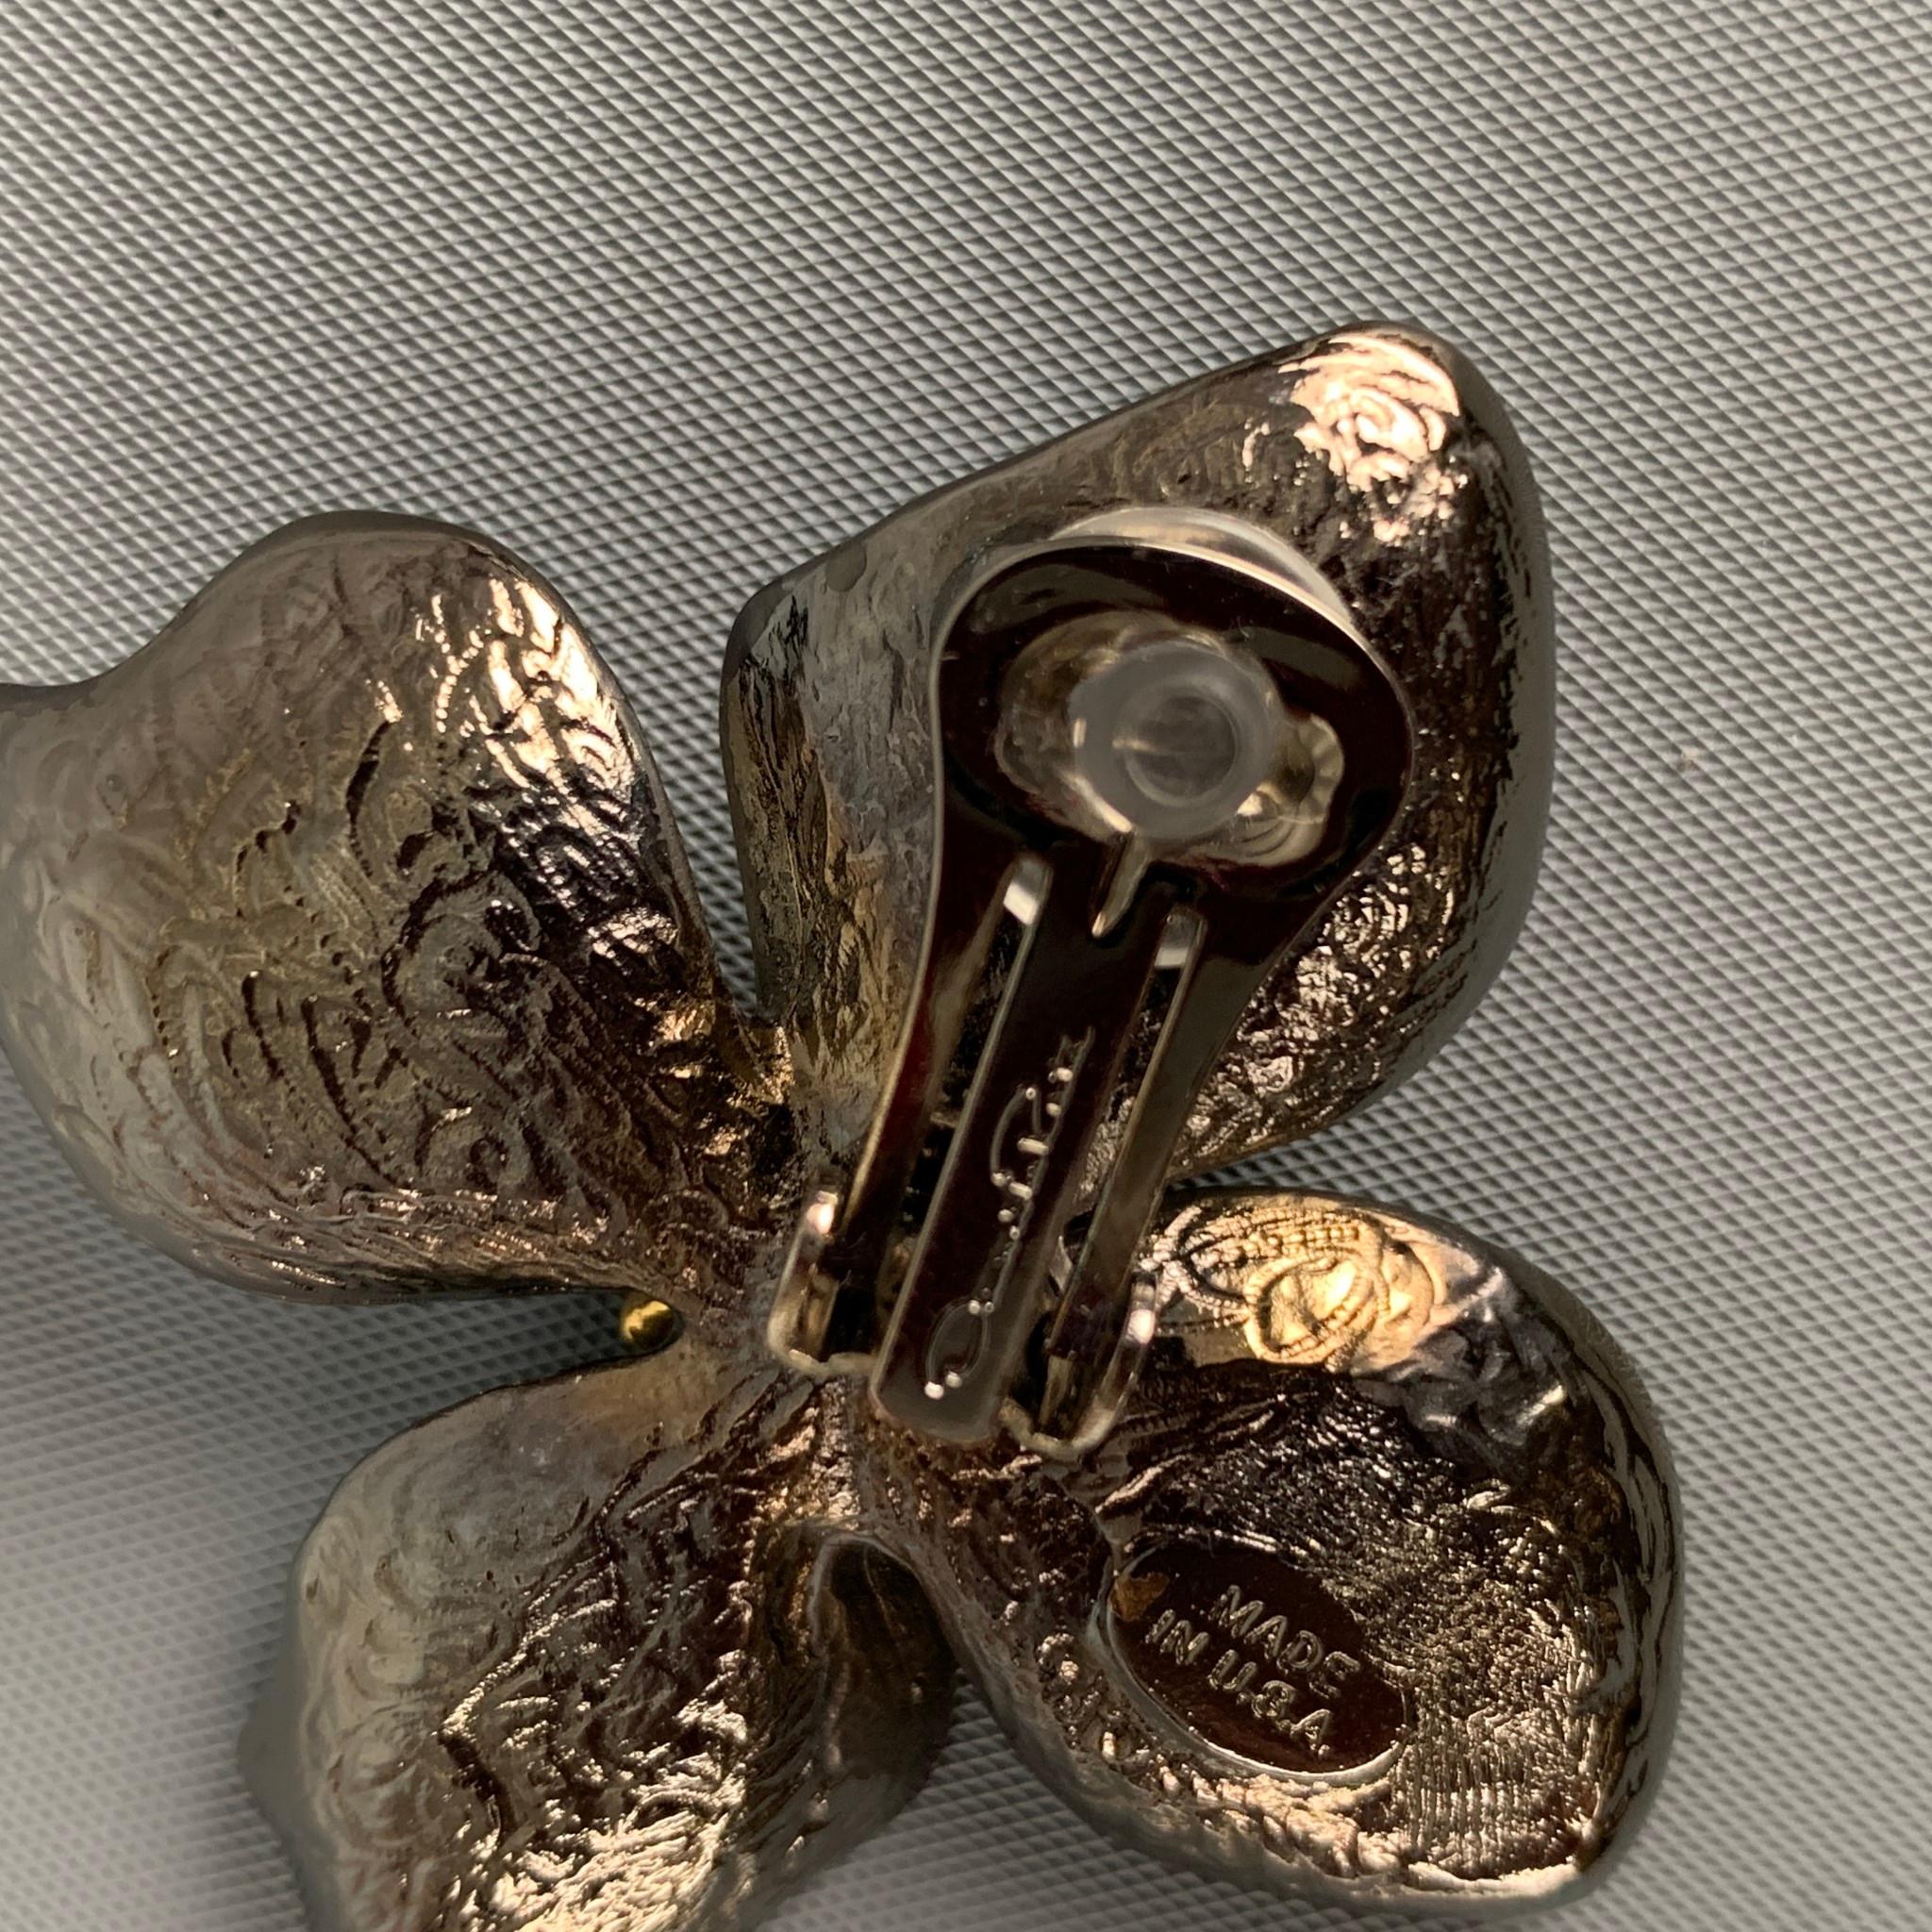 OSCAR DE LA RENTA earrings comes in a black & gold metal featuring a floral design and a clip on closure. 

Very Good Pre-Owned Condition. 
Original Retail Price: $180.00

Measurements: 

Width: 1.5 in. 